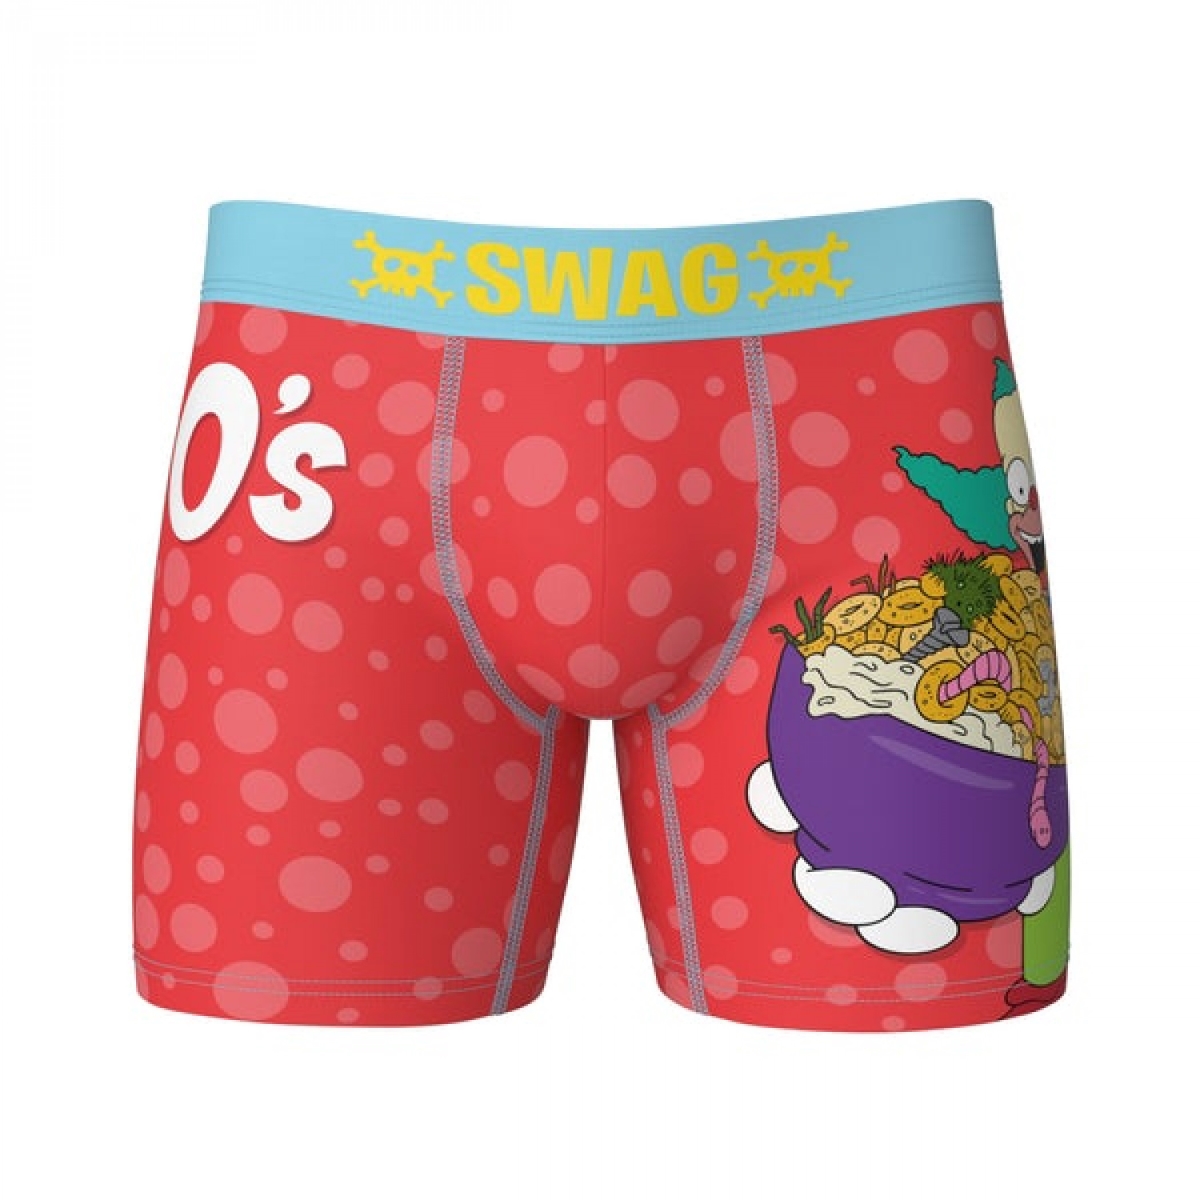 HQ Styles 847051-ge-40-42 The Krusty-OS Cereal Swag Boxer Briefs